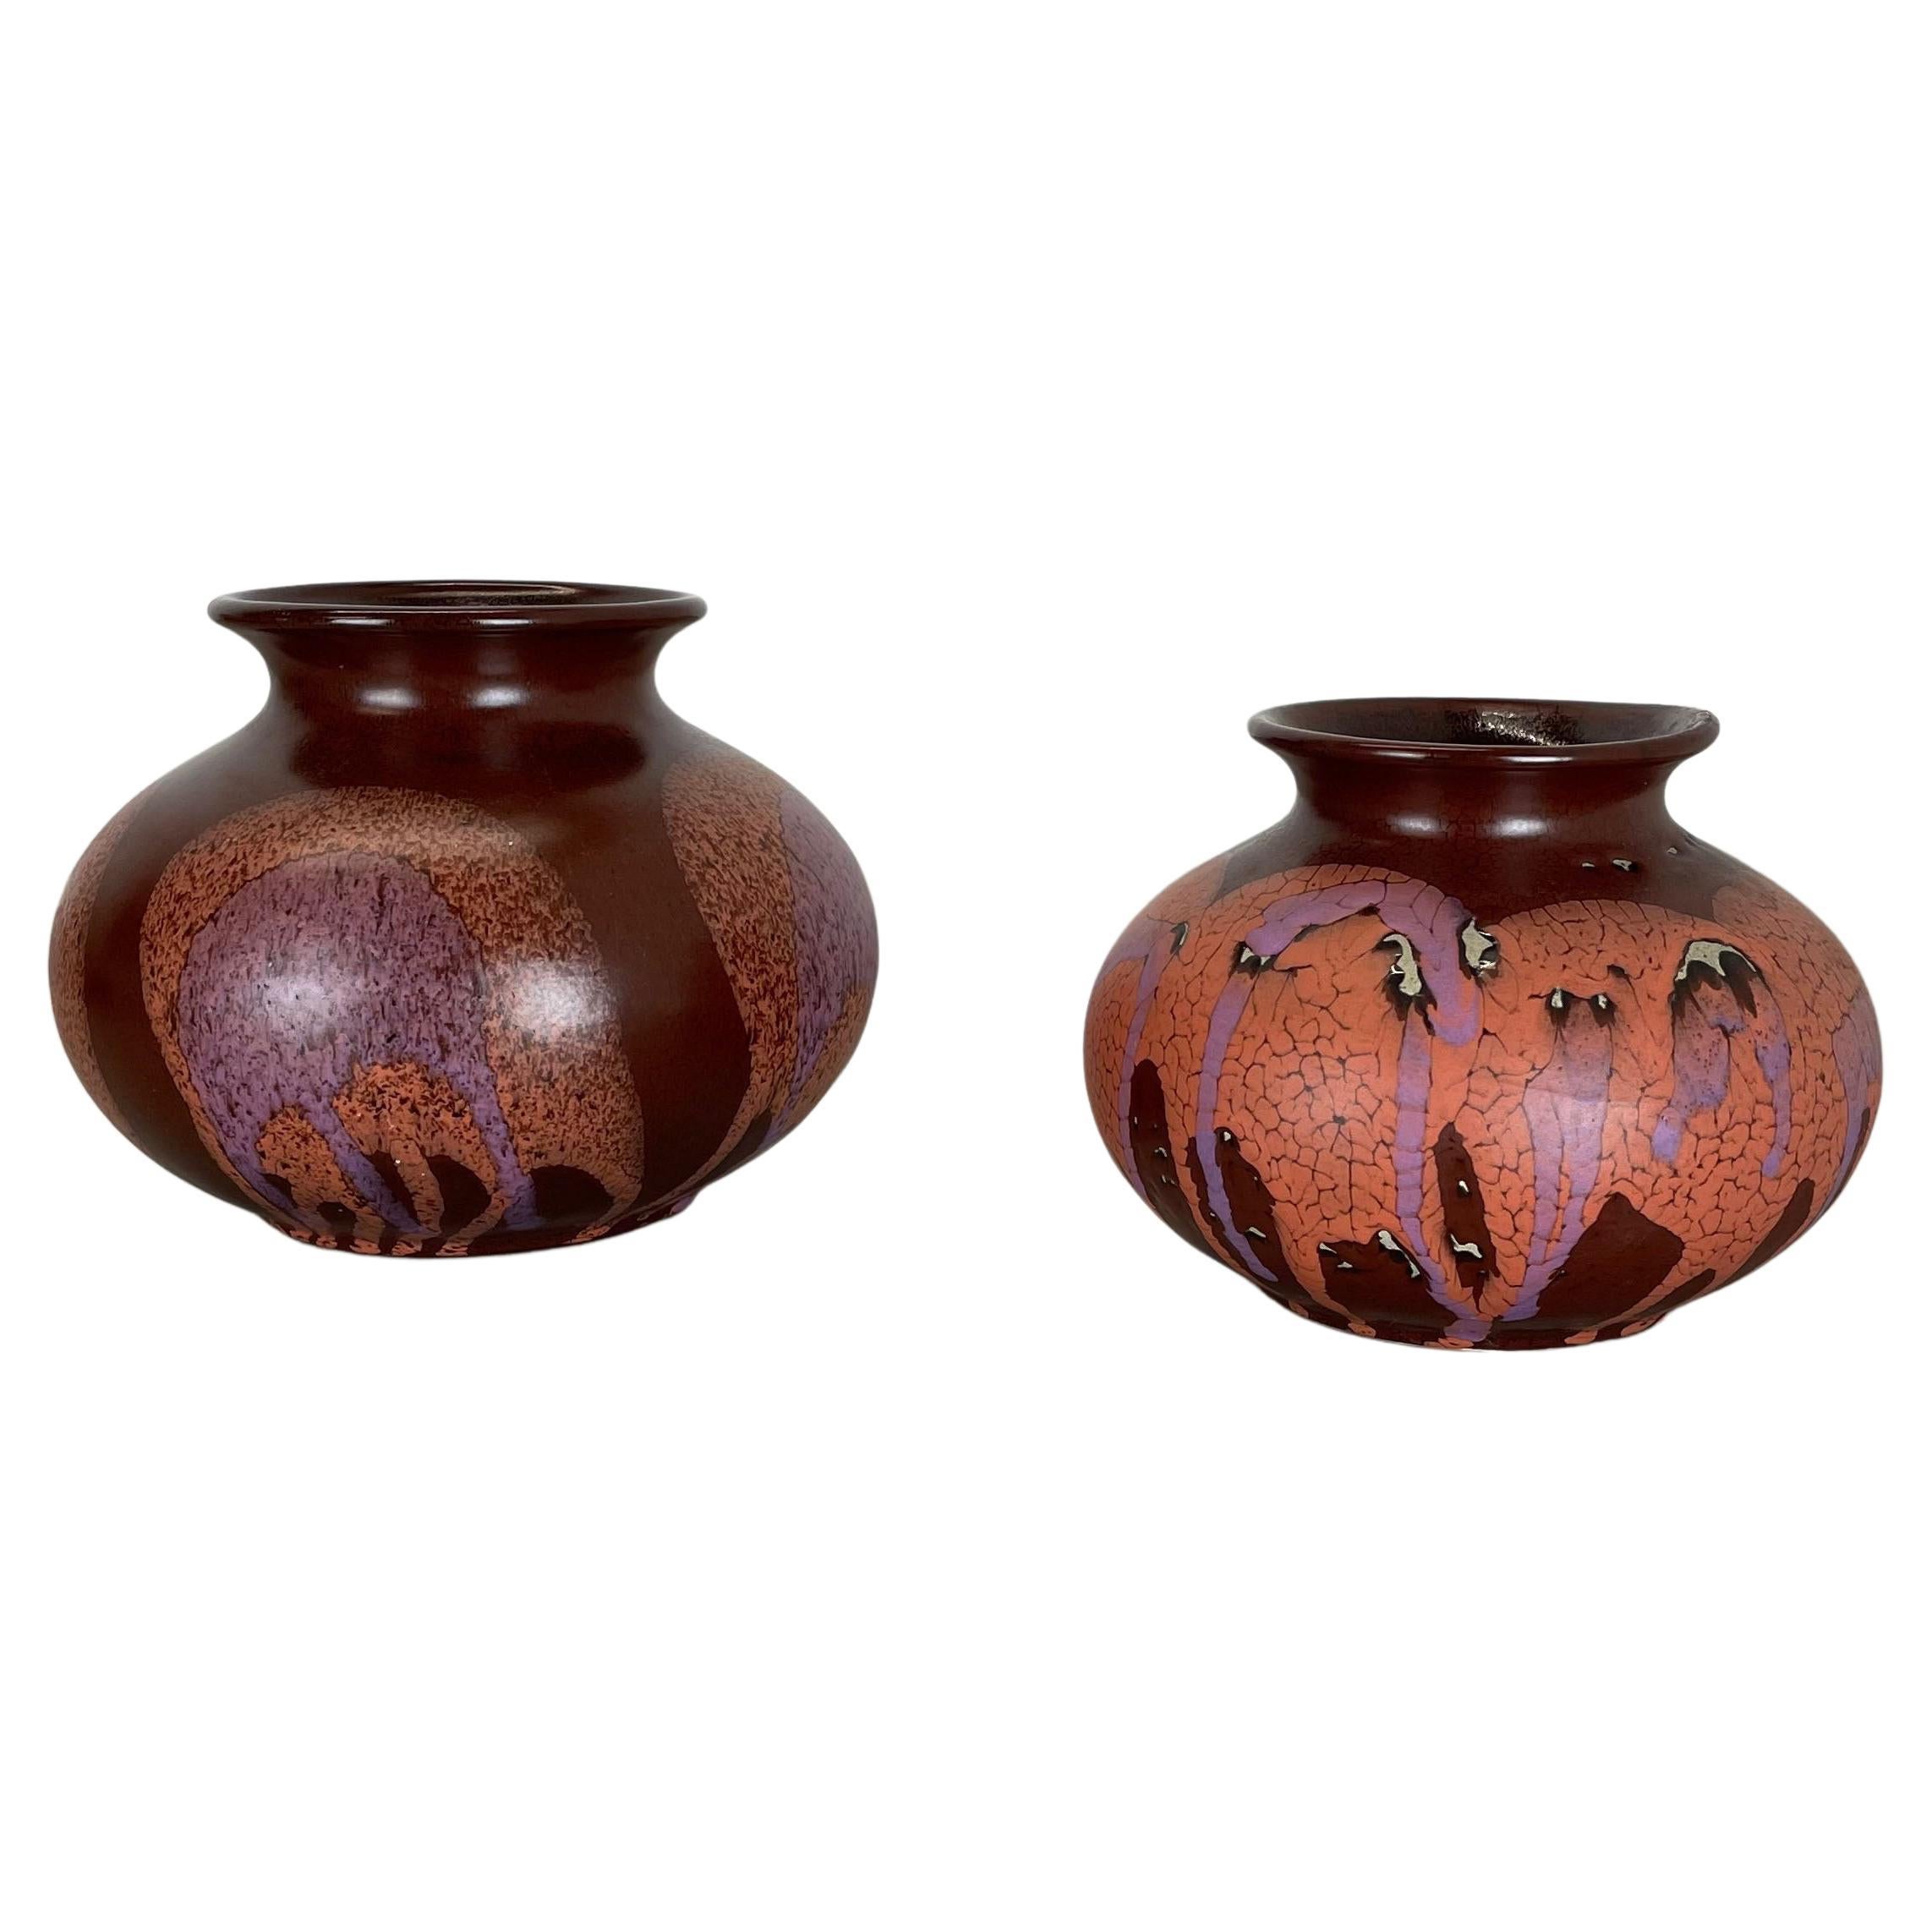 Set of Two Pottery Vases Objects by Steuler Ceramics, Germany, 1970s